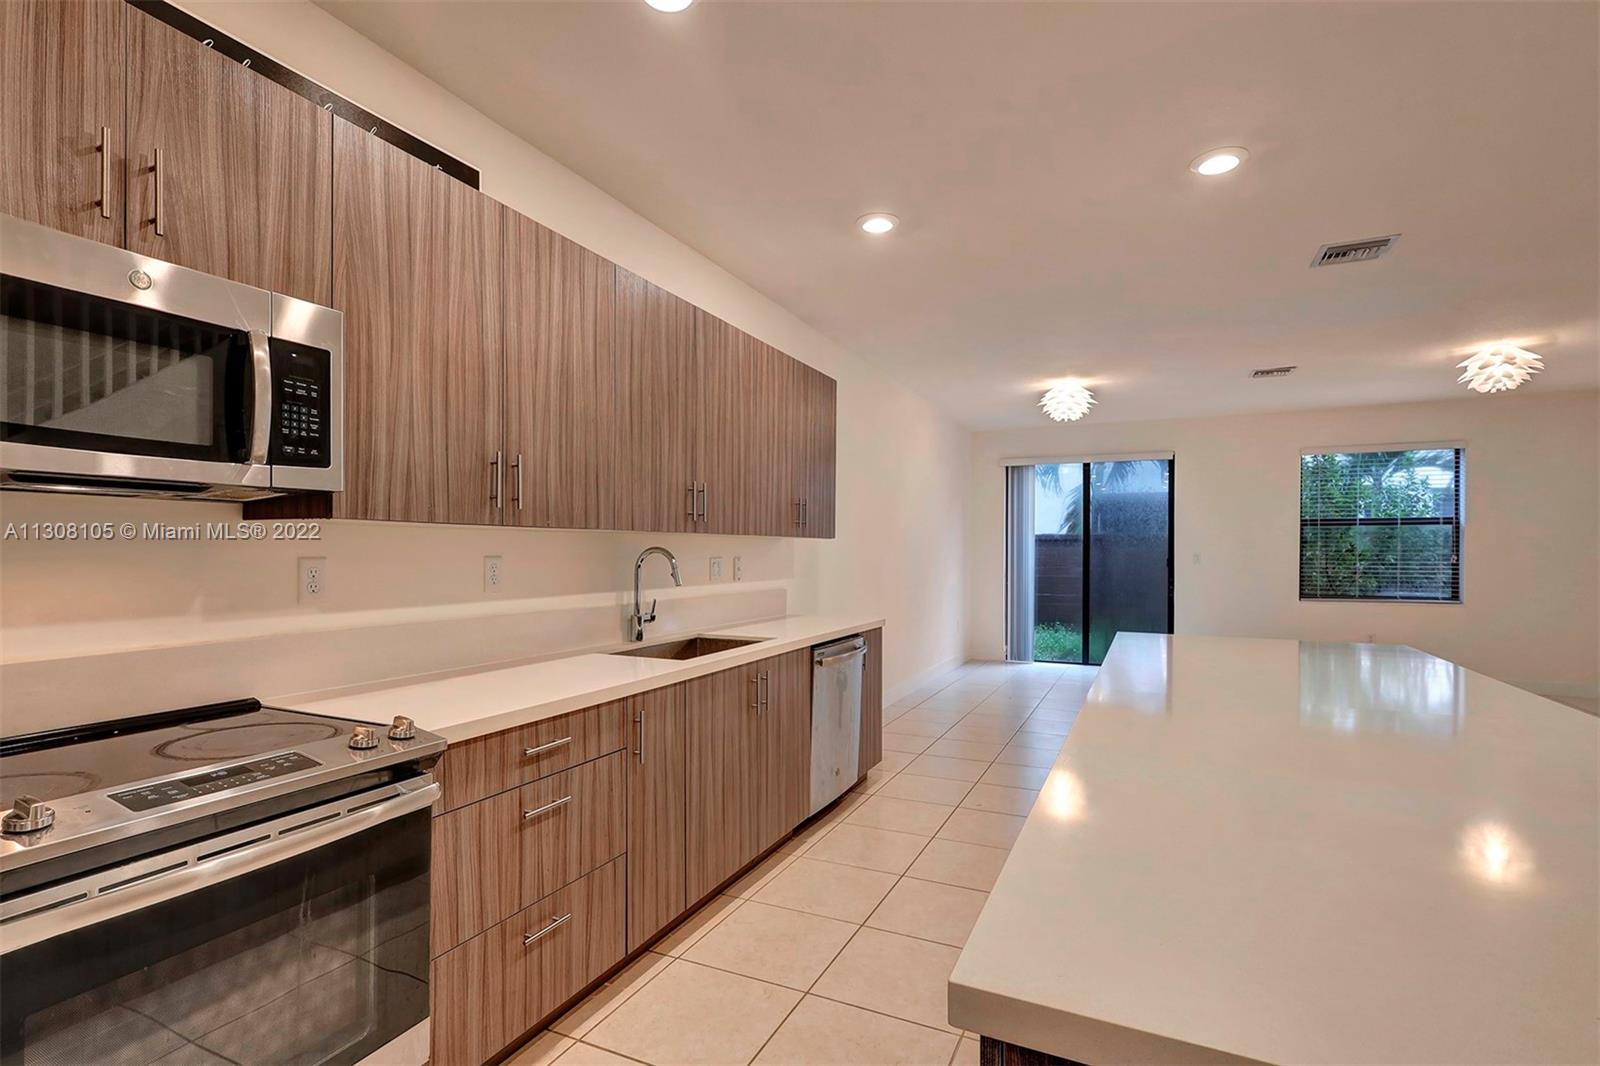 a kitchen with stainless steel appliances a sink dishwasher a stove microwave and cabinets